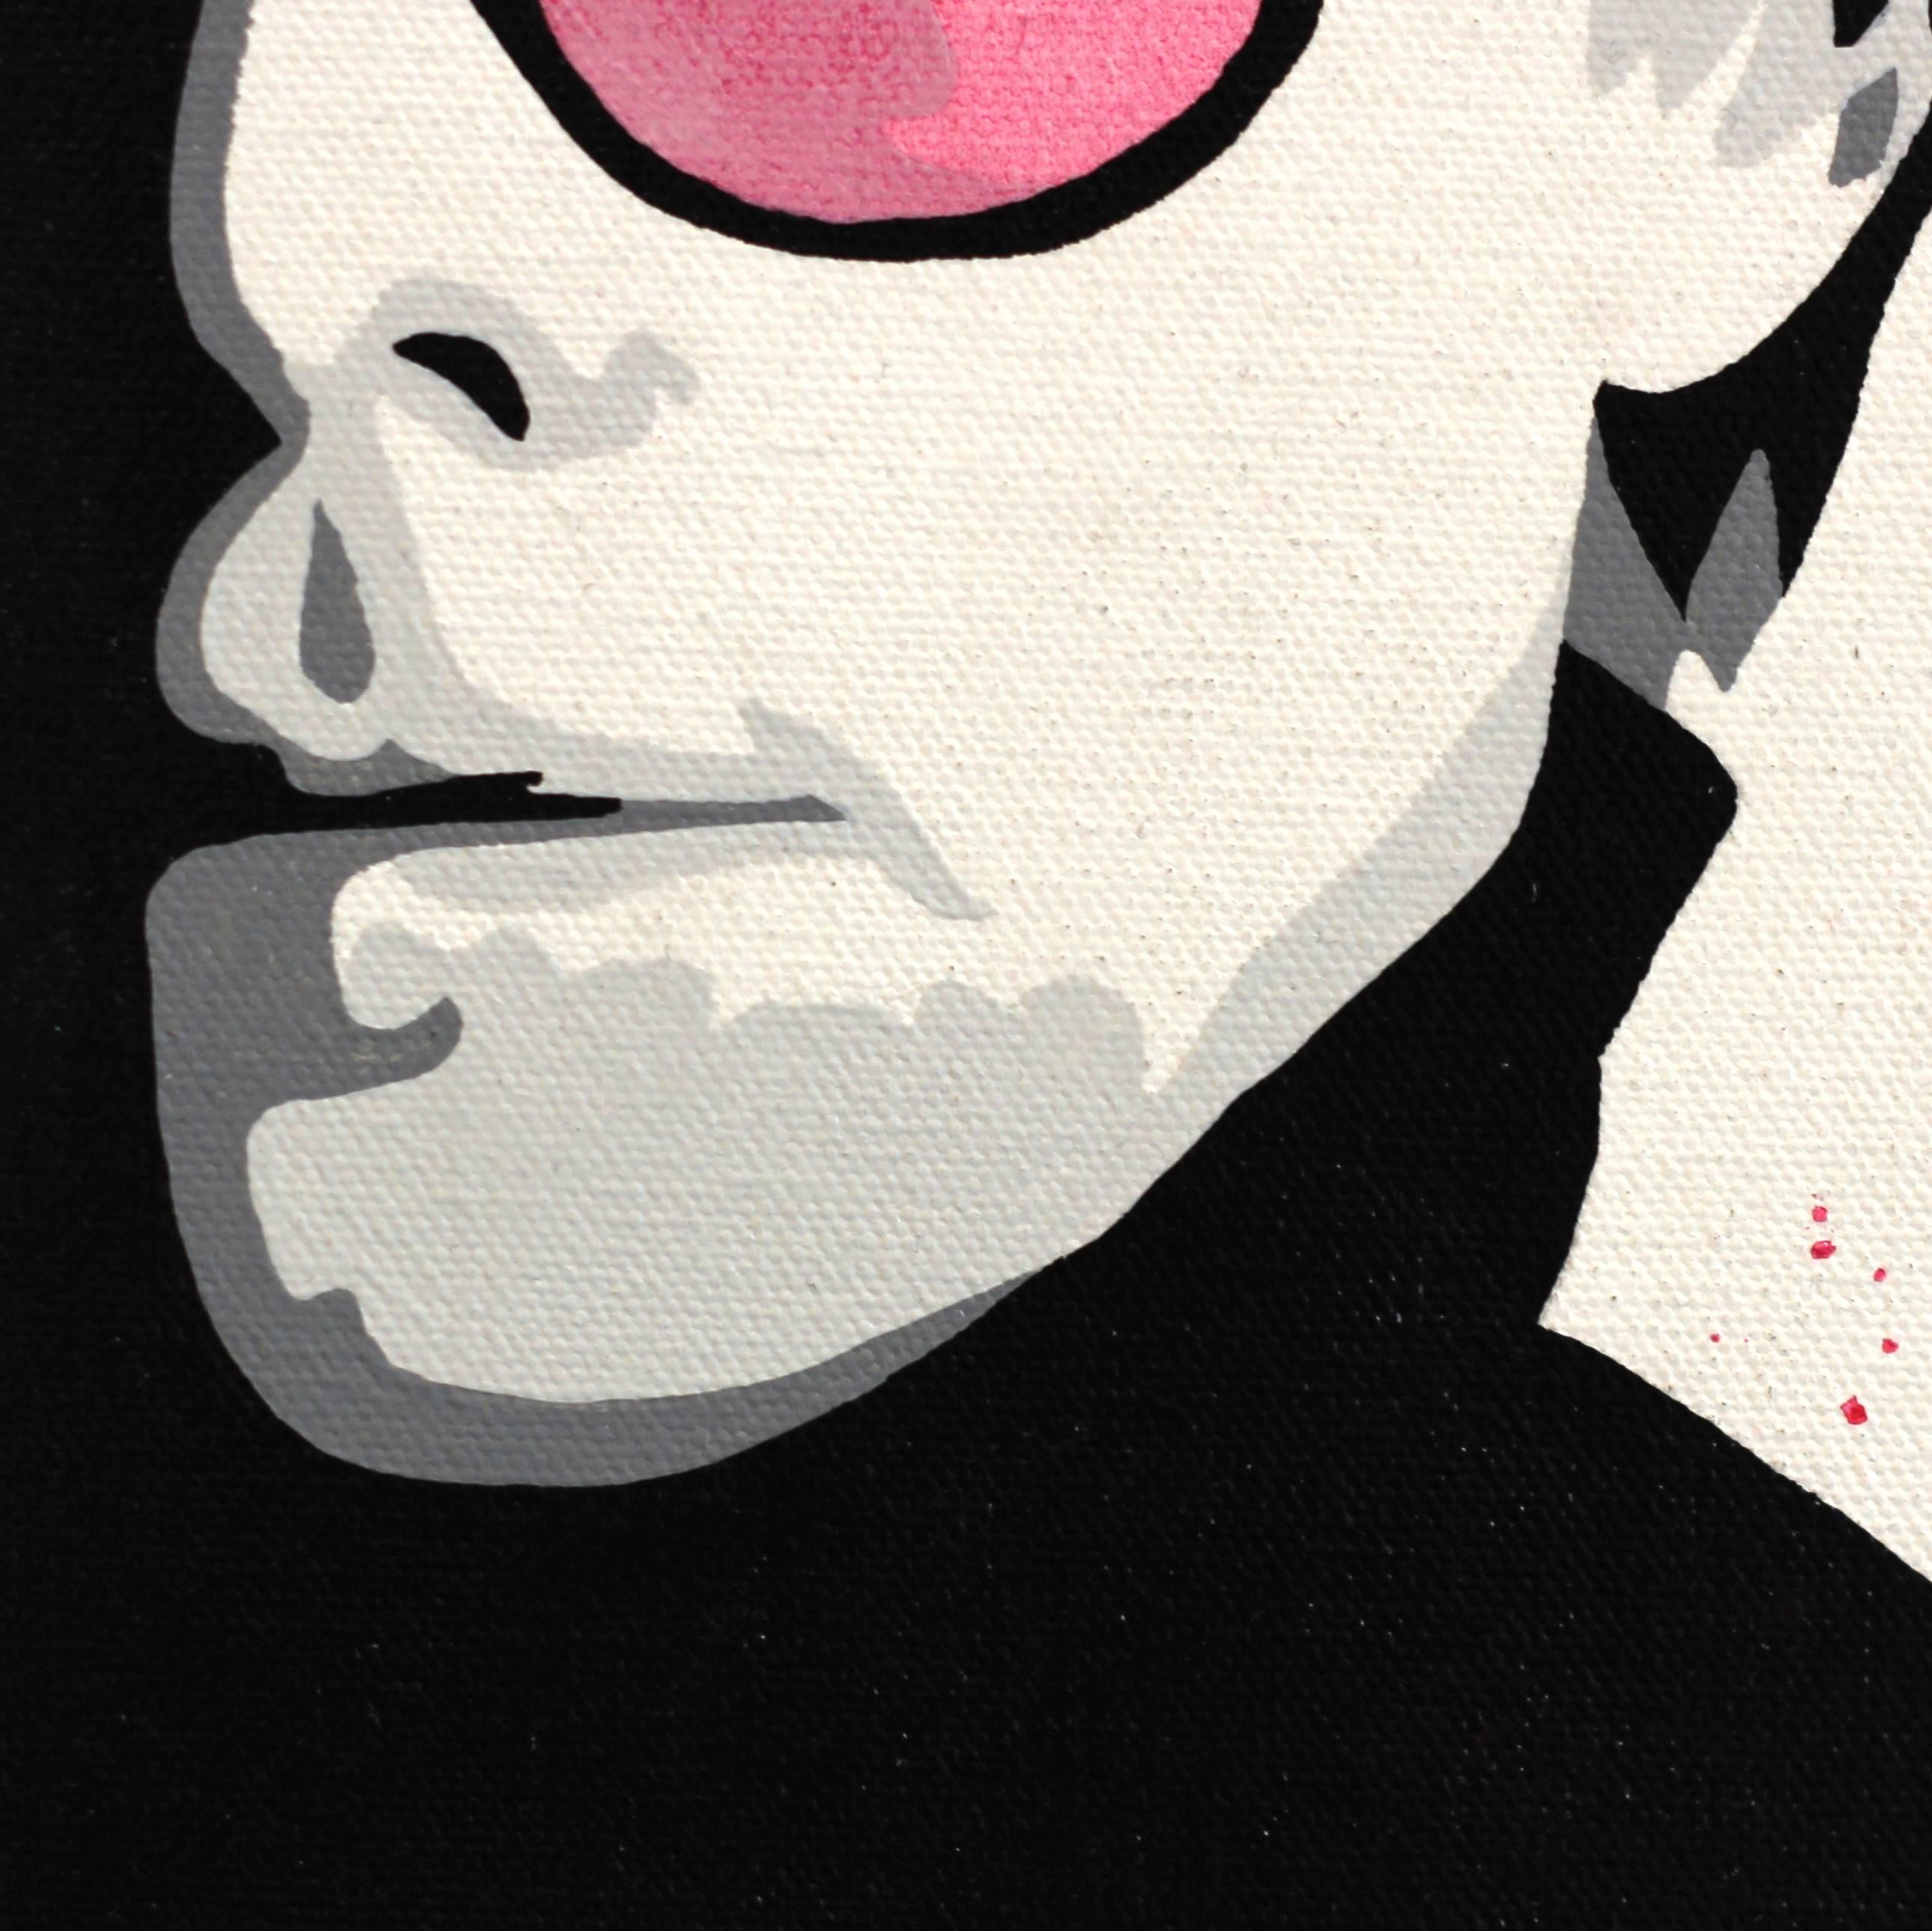 Rose Colored Glasses - Pop Art Painting by Courtney Raney